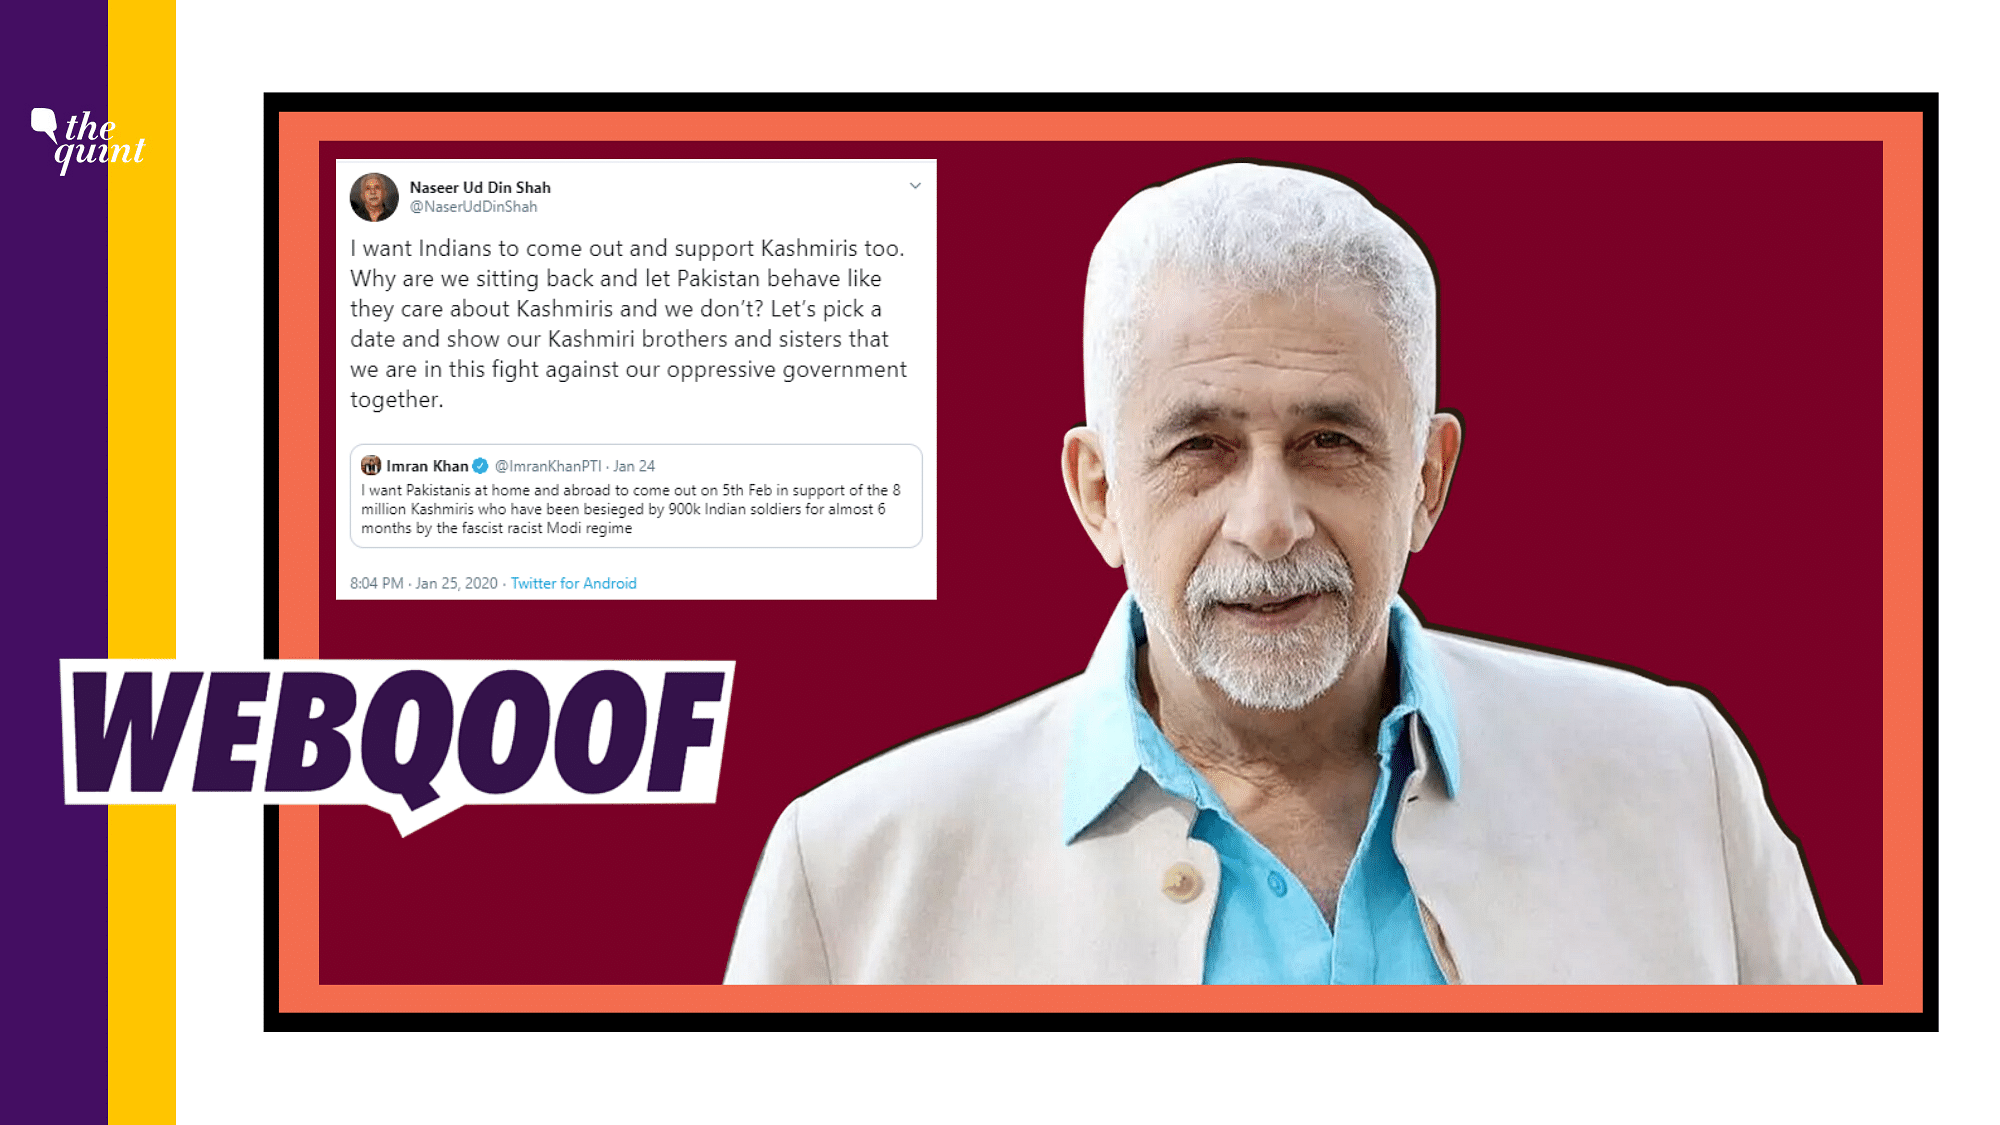 A fake Twitter account is falsely attributing the information shared to actor Naseeruddin Shah.